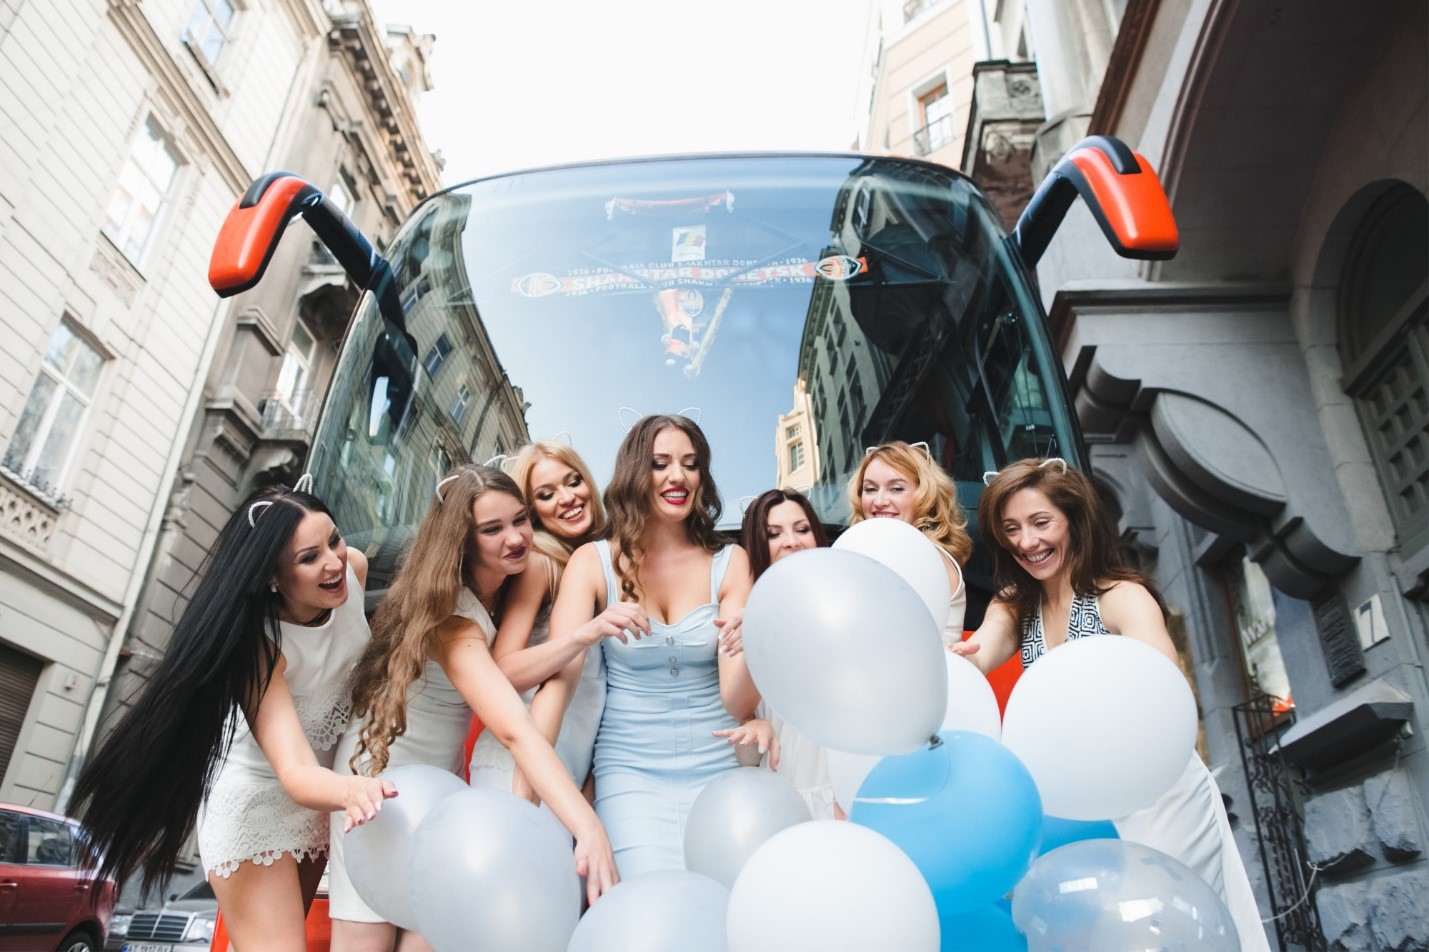 3 Ideas for Your Next Party Bus Rental